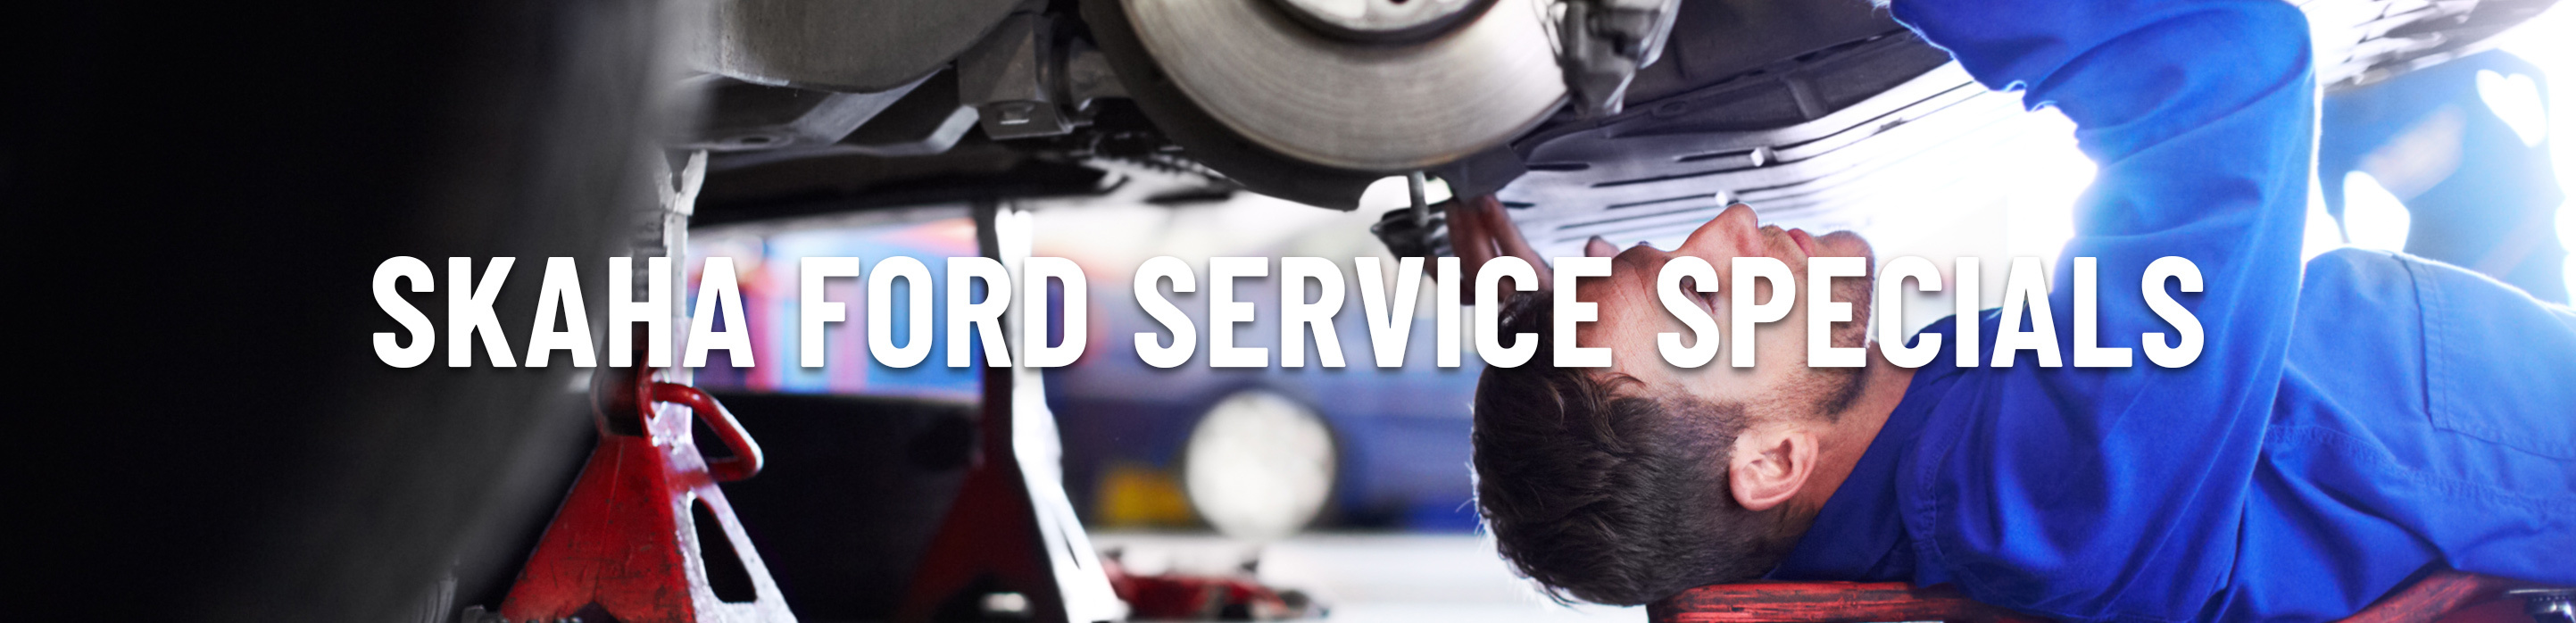 skaha ford service specials in penticton